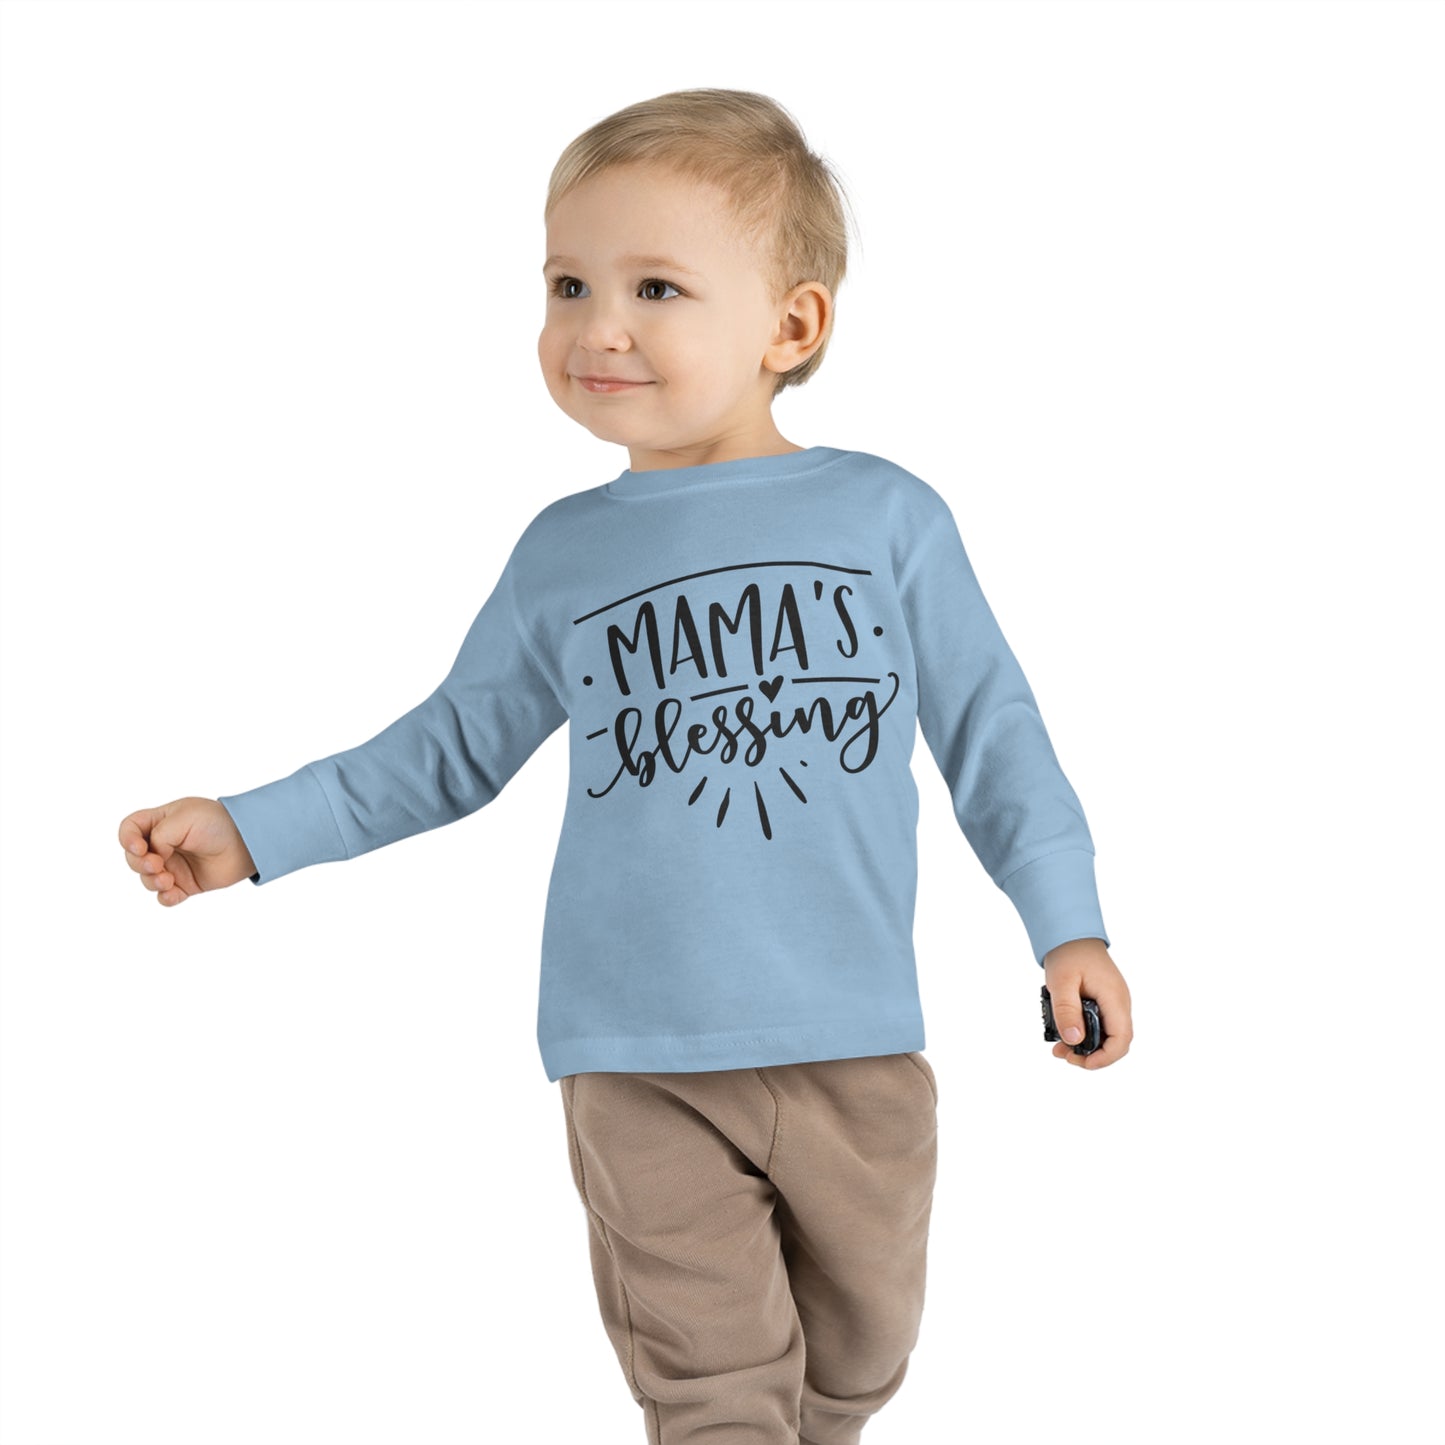 Mama's Blessing Toddler Long Sleeve Tee